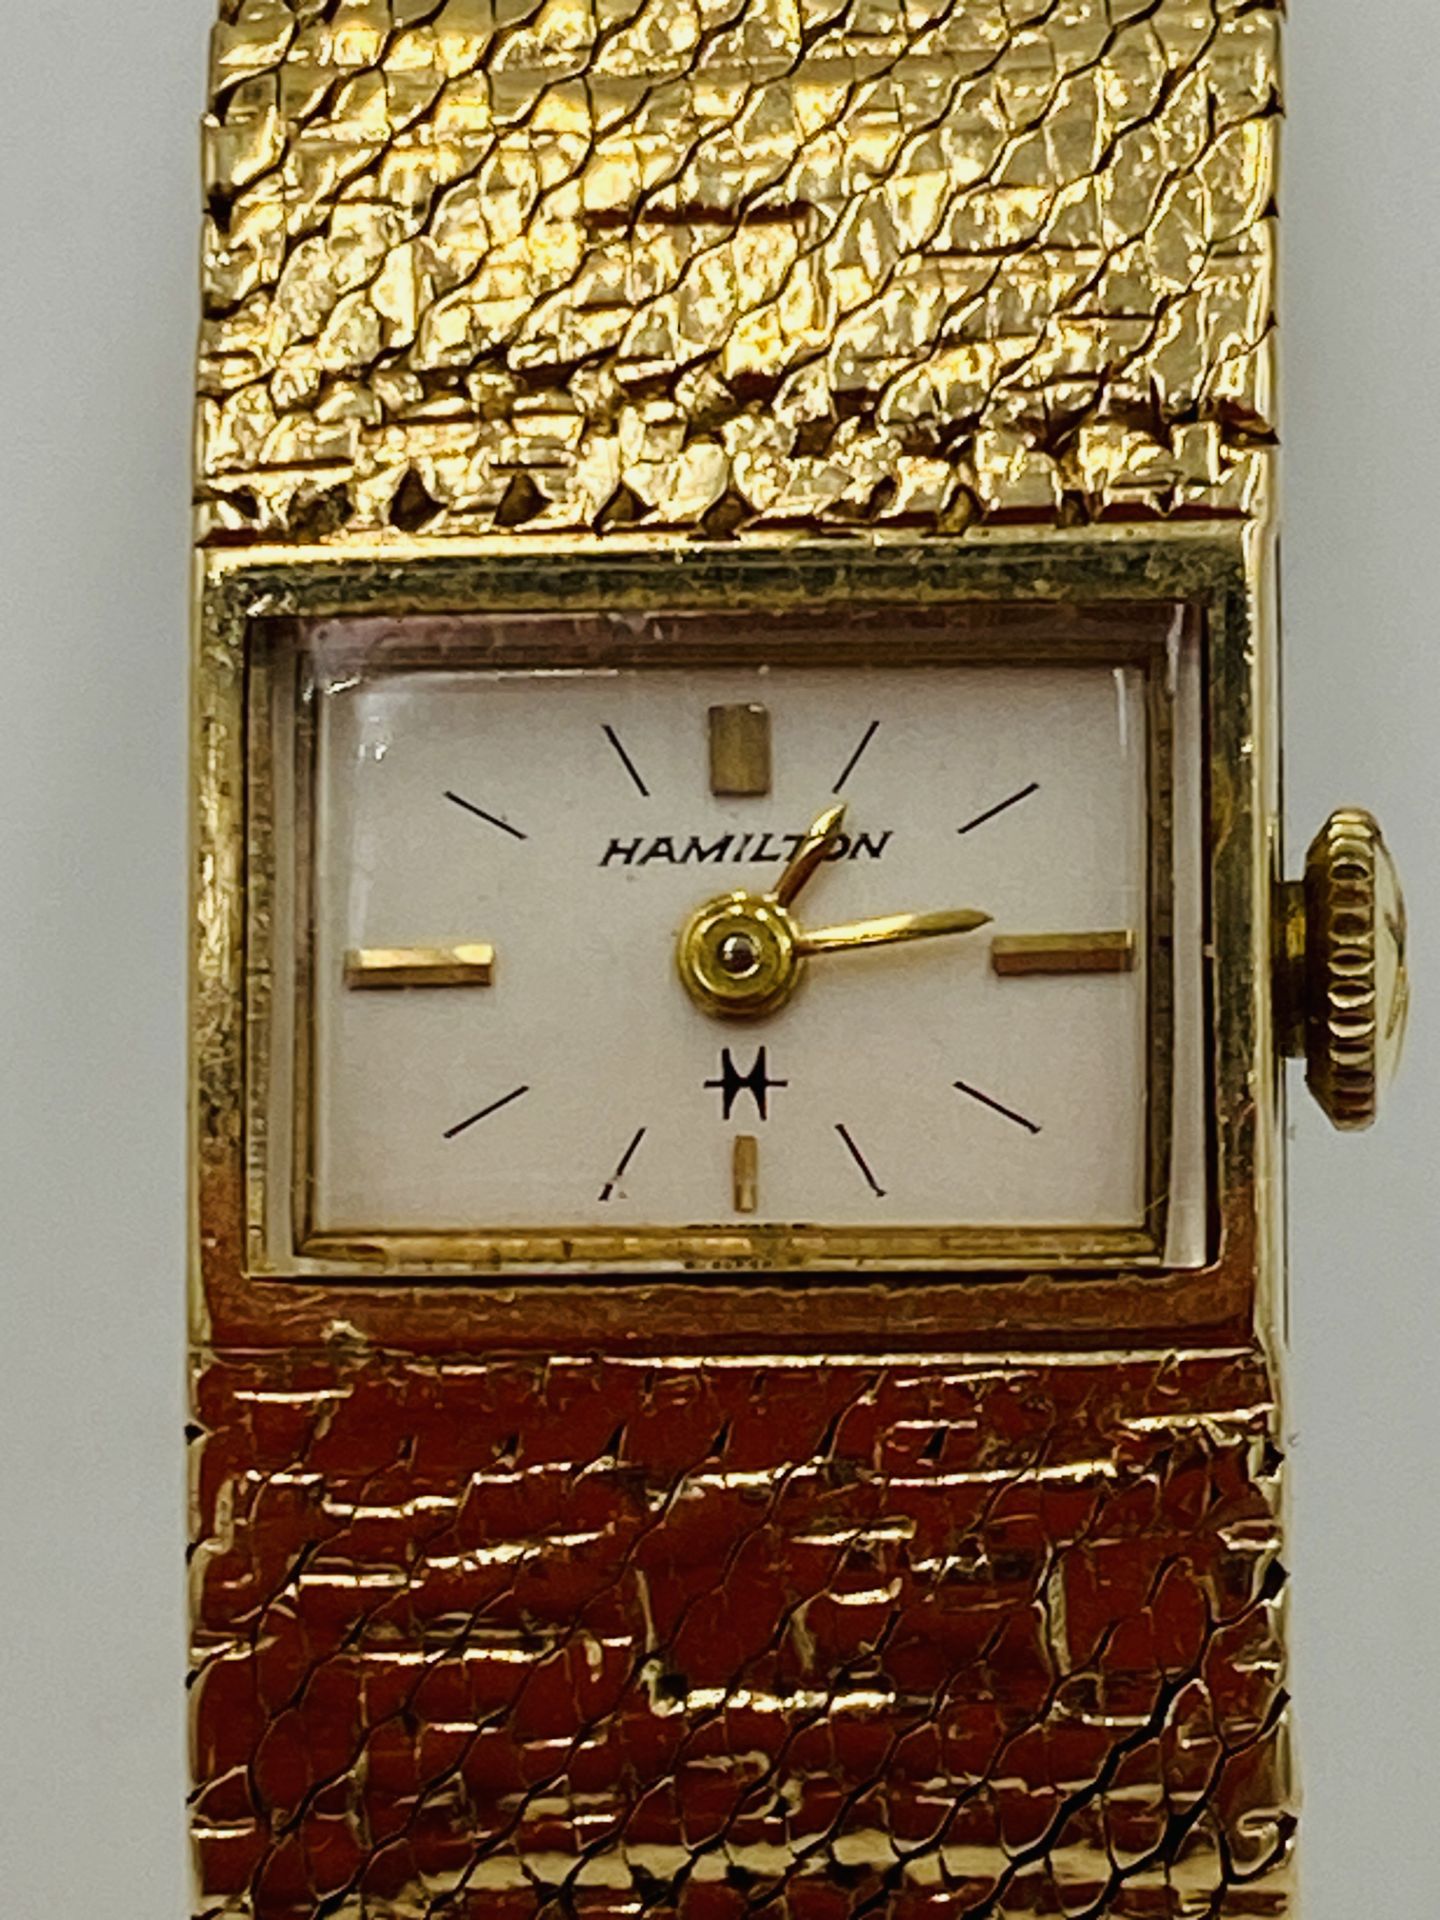 Hamilton wristwatch in 9ct gold case - Image 4 of 6